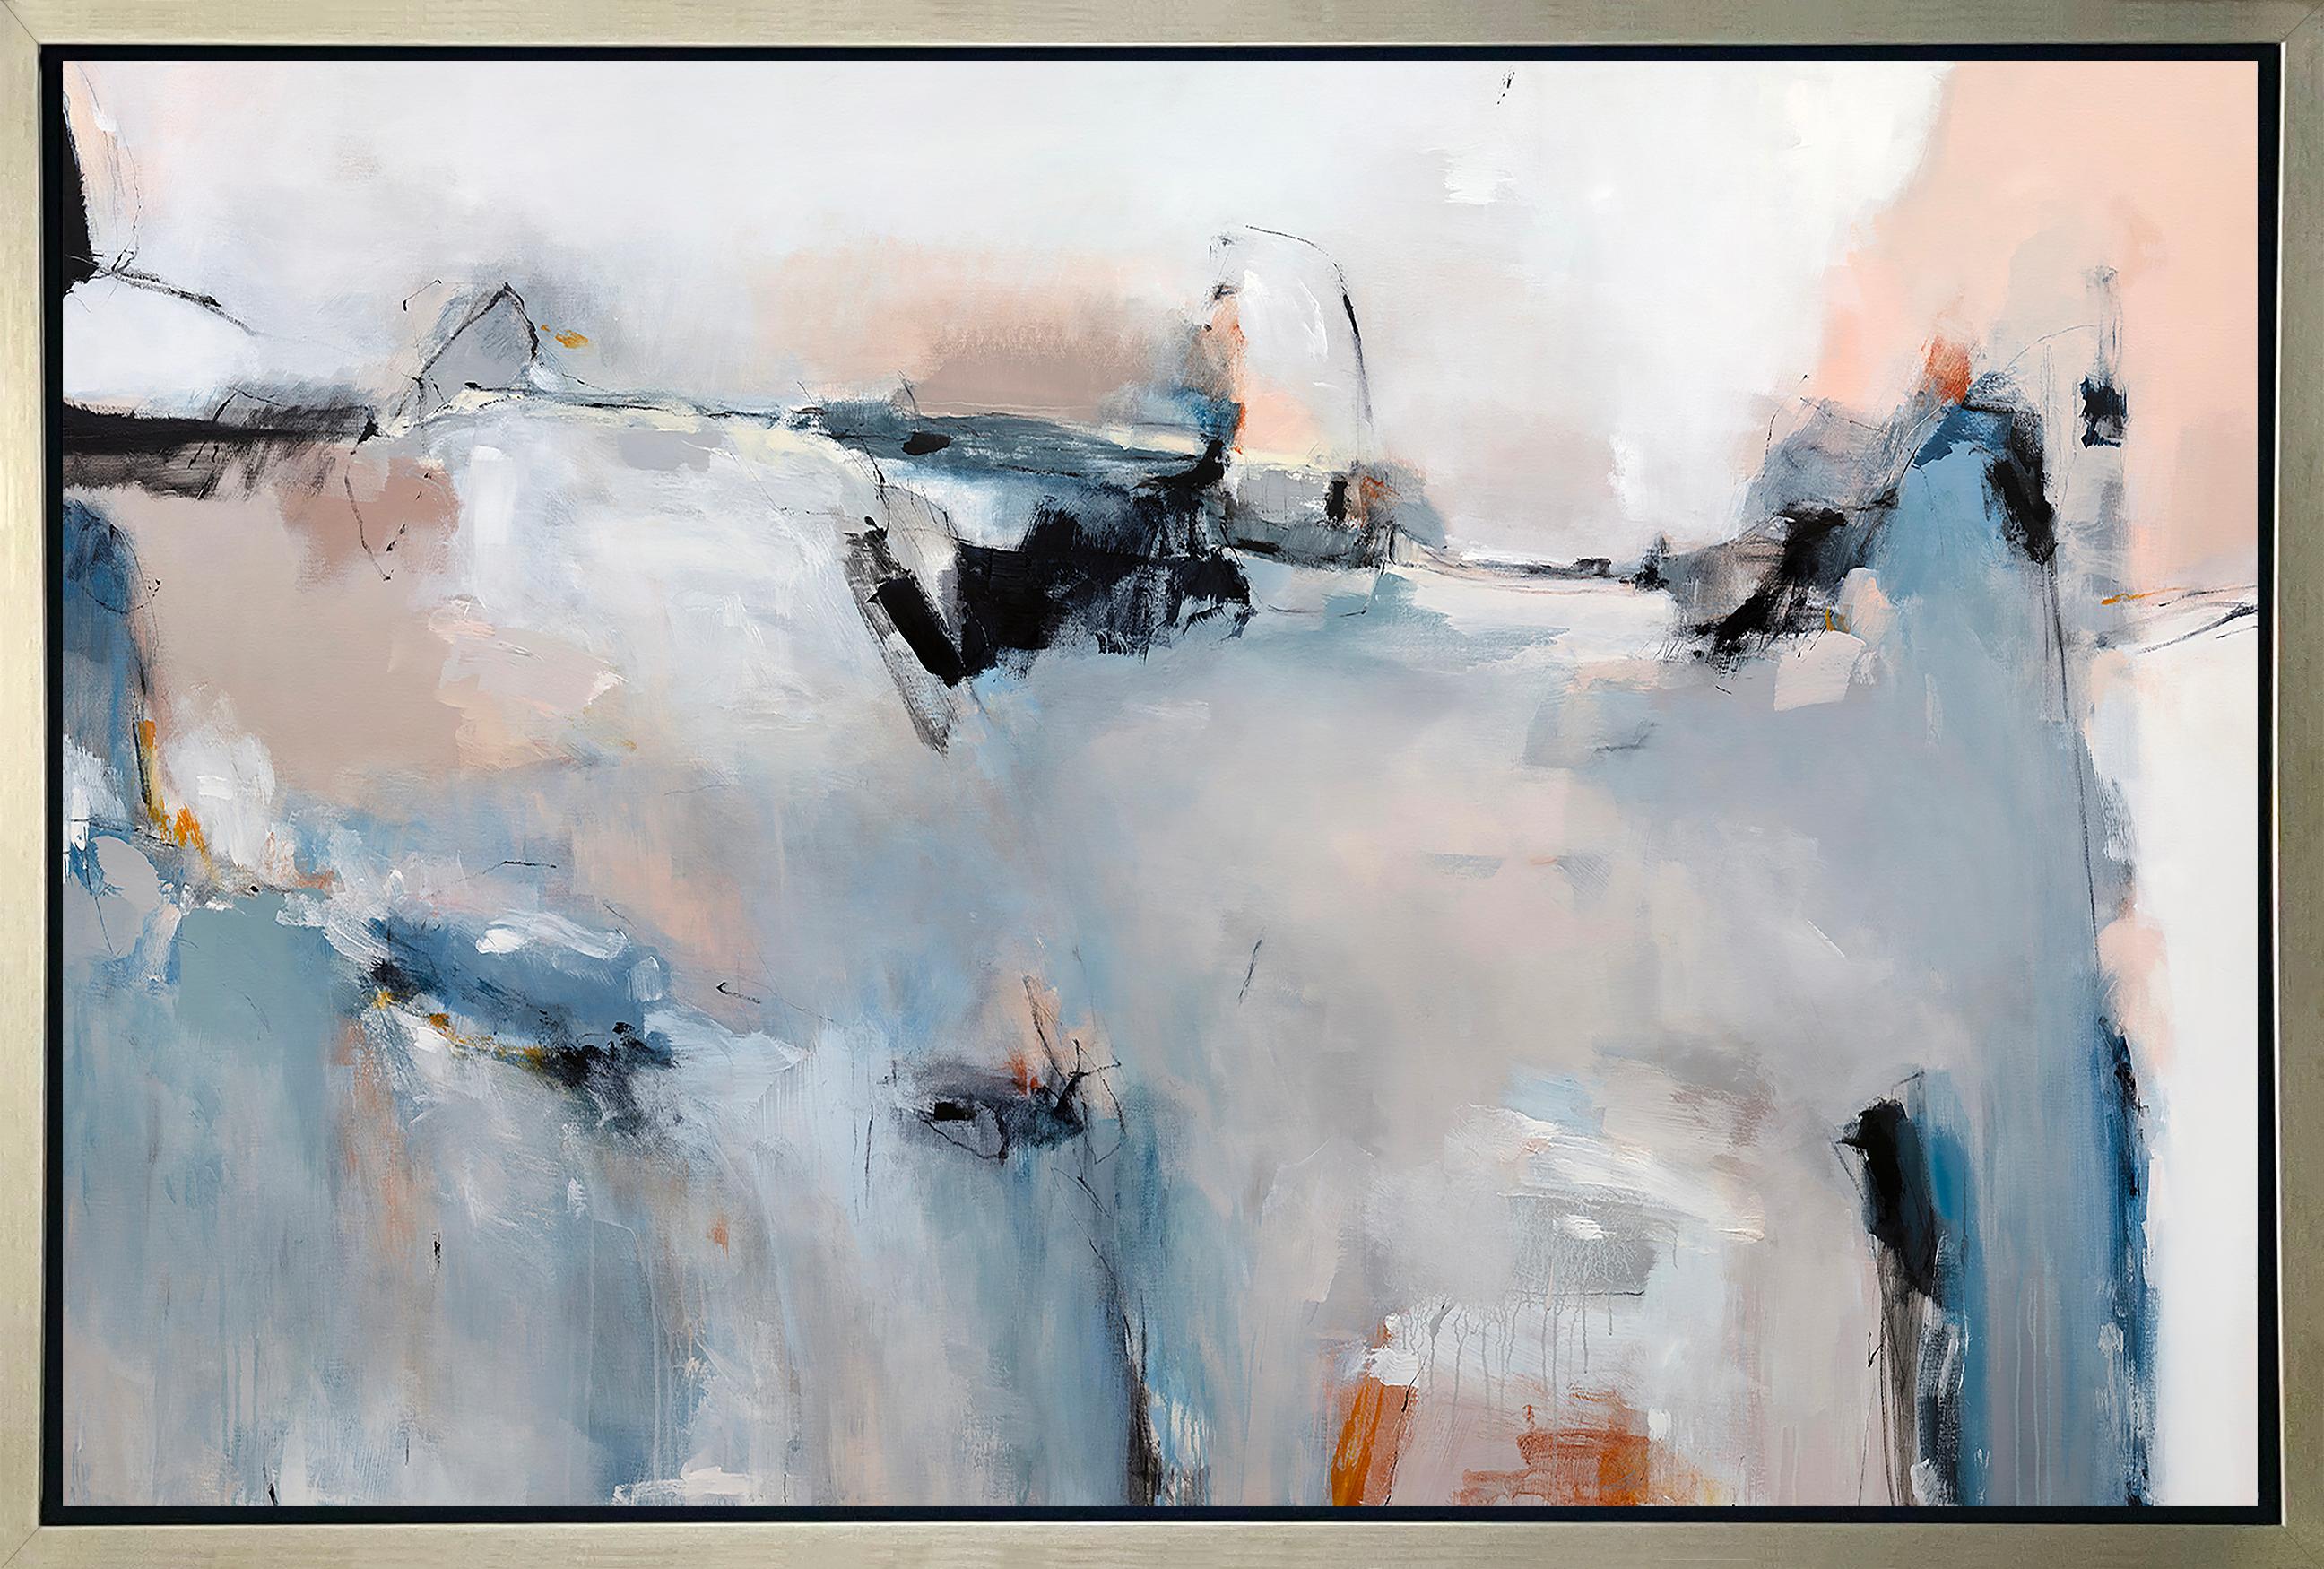 Kelly Rossetti Abstract Print - "Transparent Frontier, " Framed Limited Edition Giclee Print, 40" x 60"